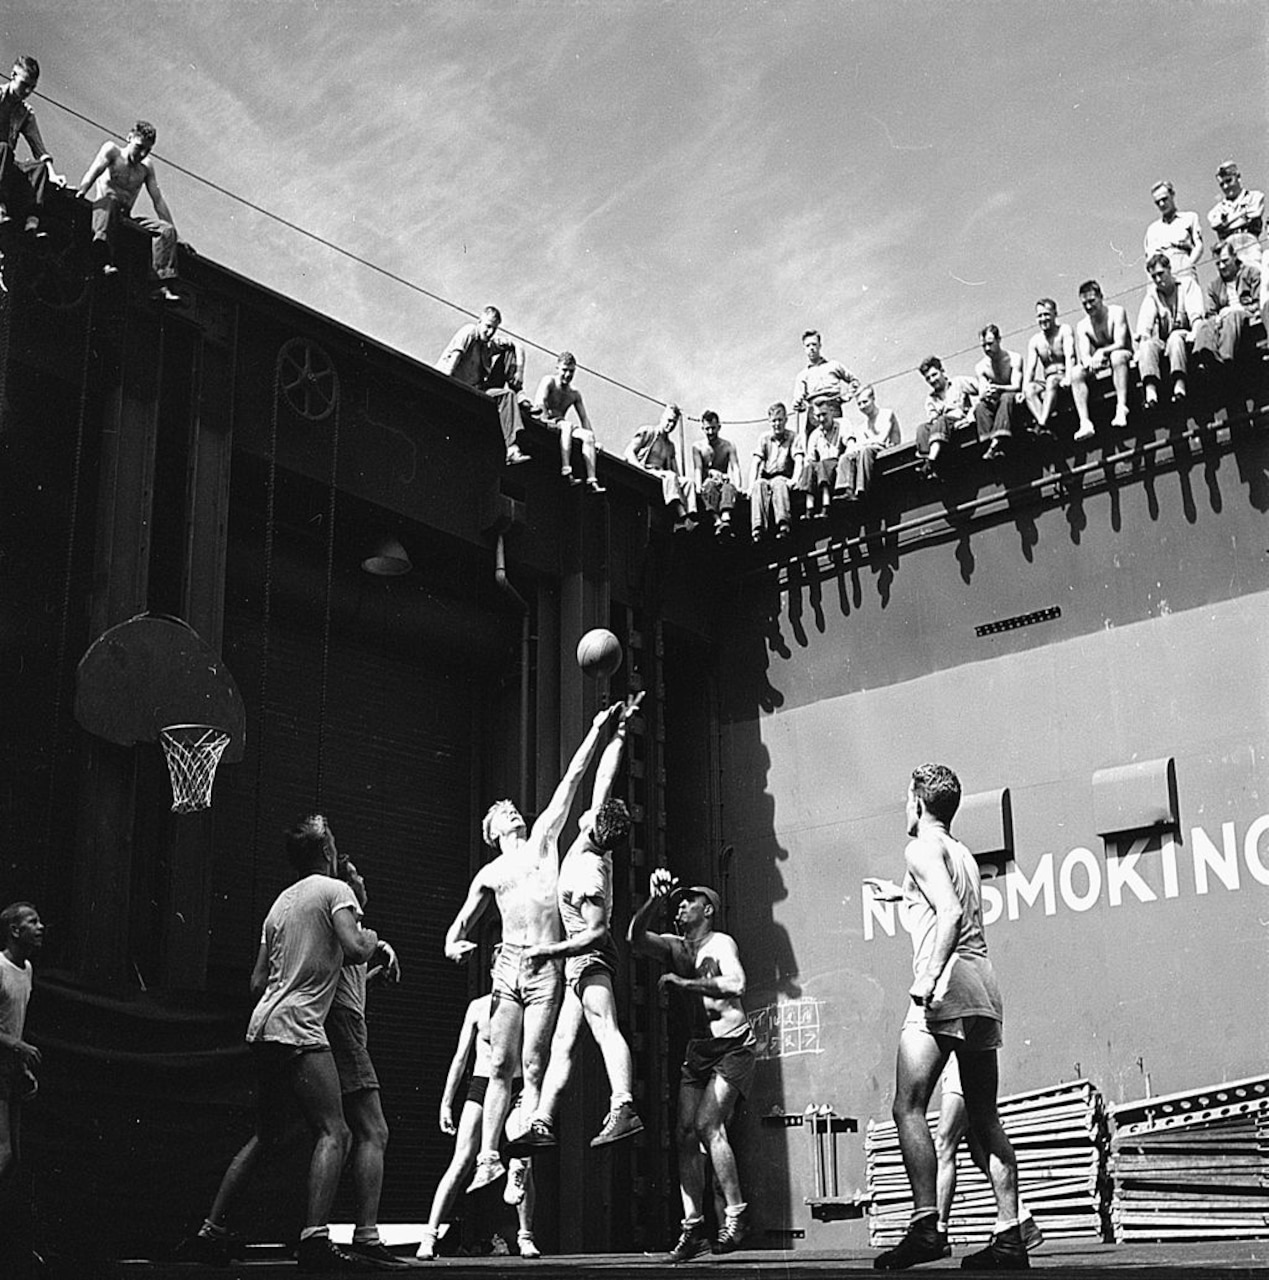 Men on a ship play a game of basketball.